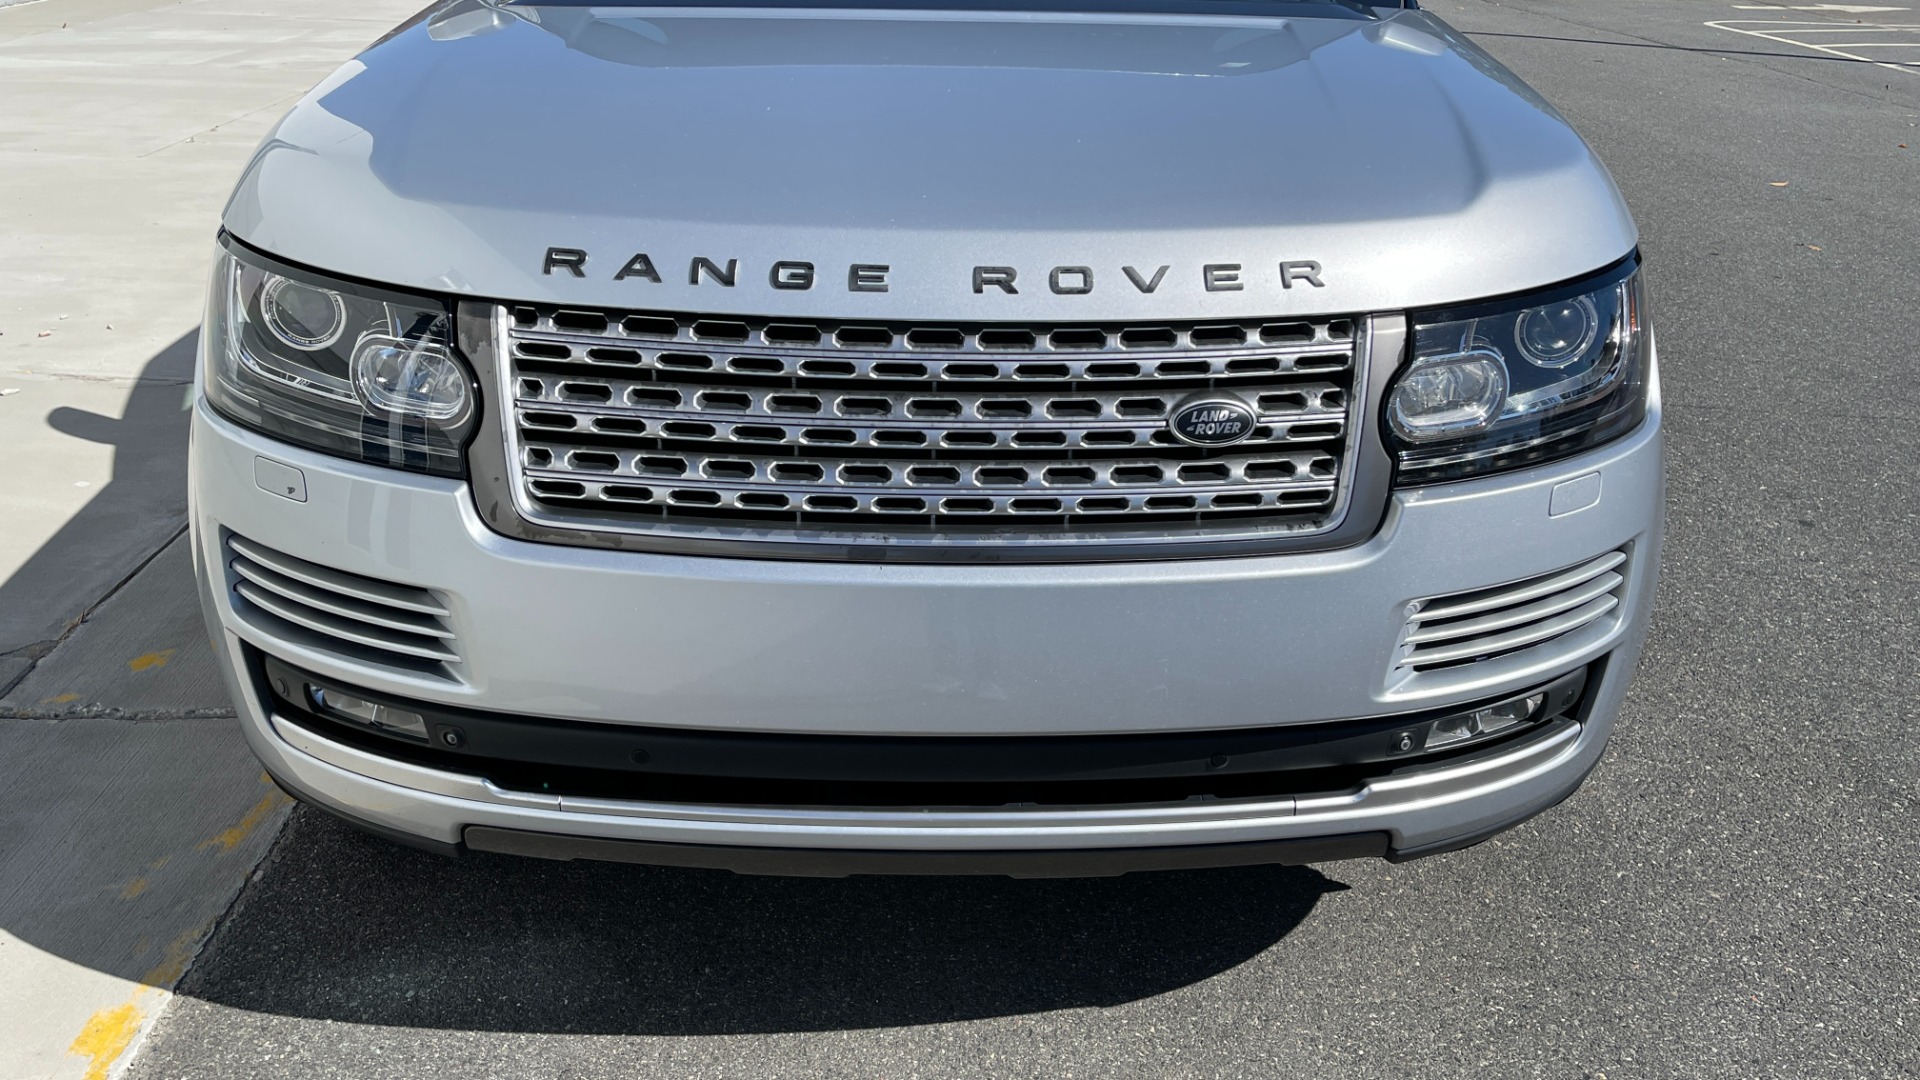 Used 2013 Land Rover Range Rover HSE / 22IN WHEELS / CLIMATE PACKAGE / SOFT CLOSE / VISION ASSIST for sale Sold at Formula Imports in Charlotte NC 28227 35